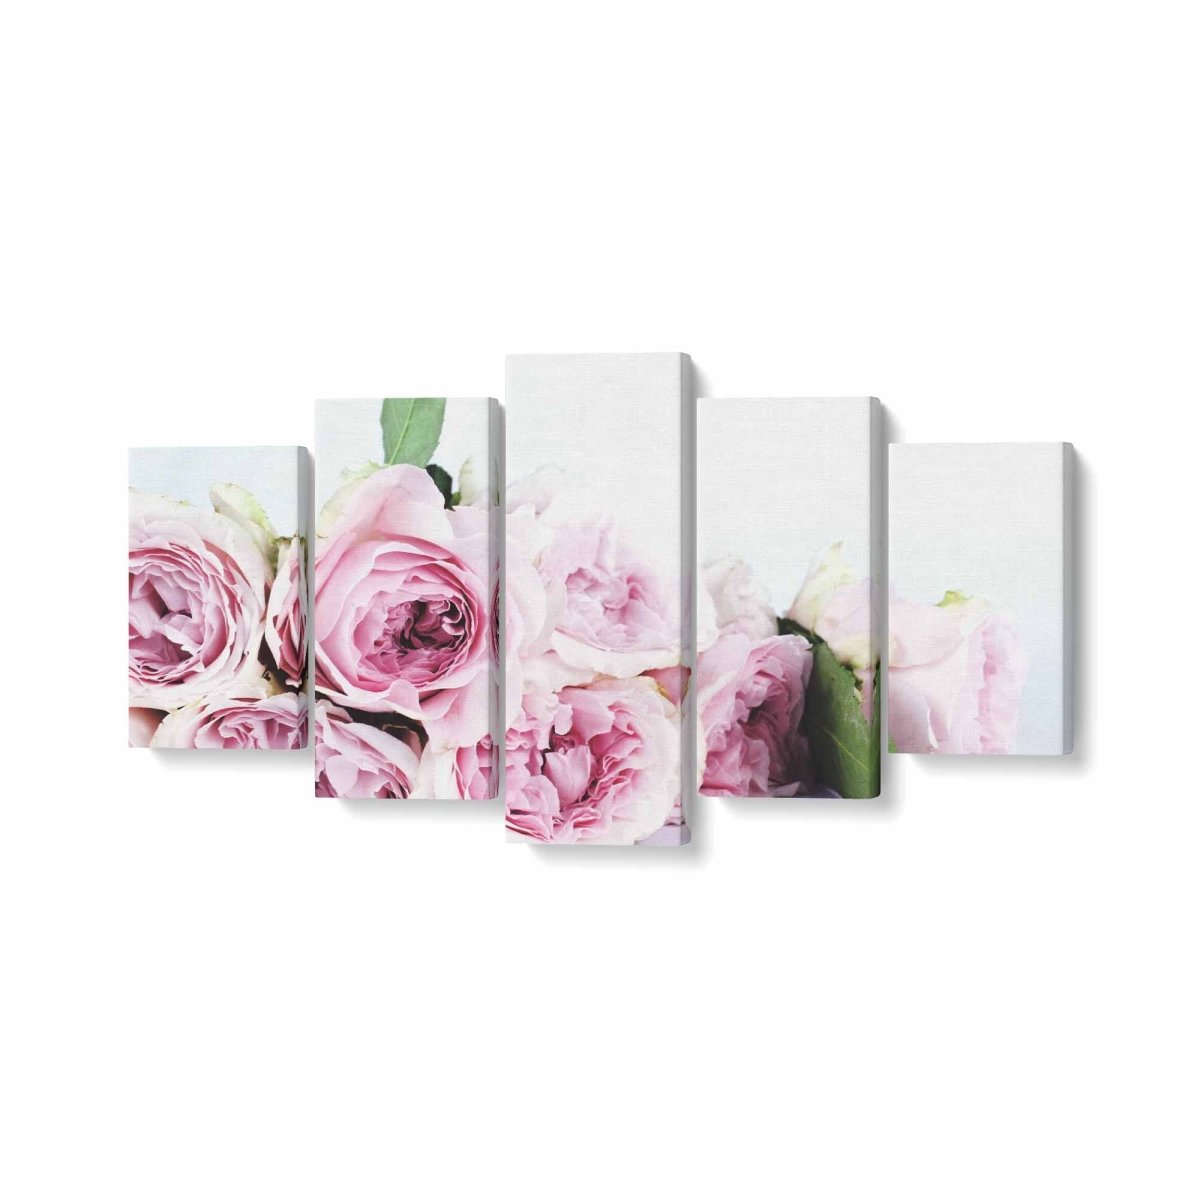 Tablou MultiCanvas 5 piese Pink Roses - clevny.ro